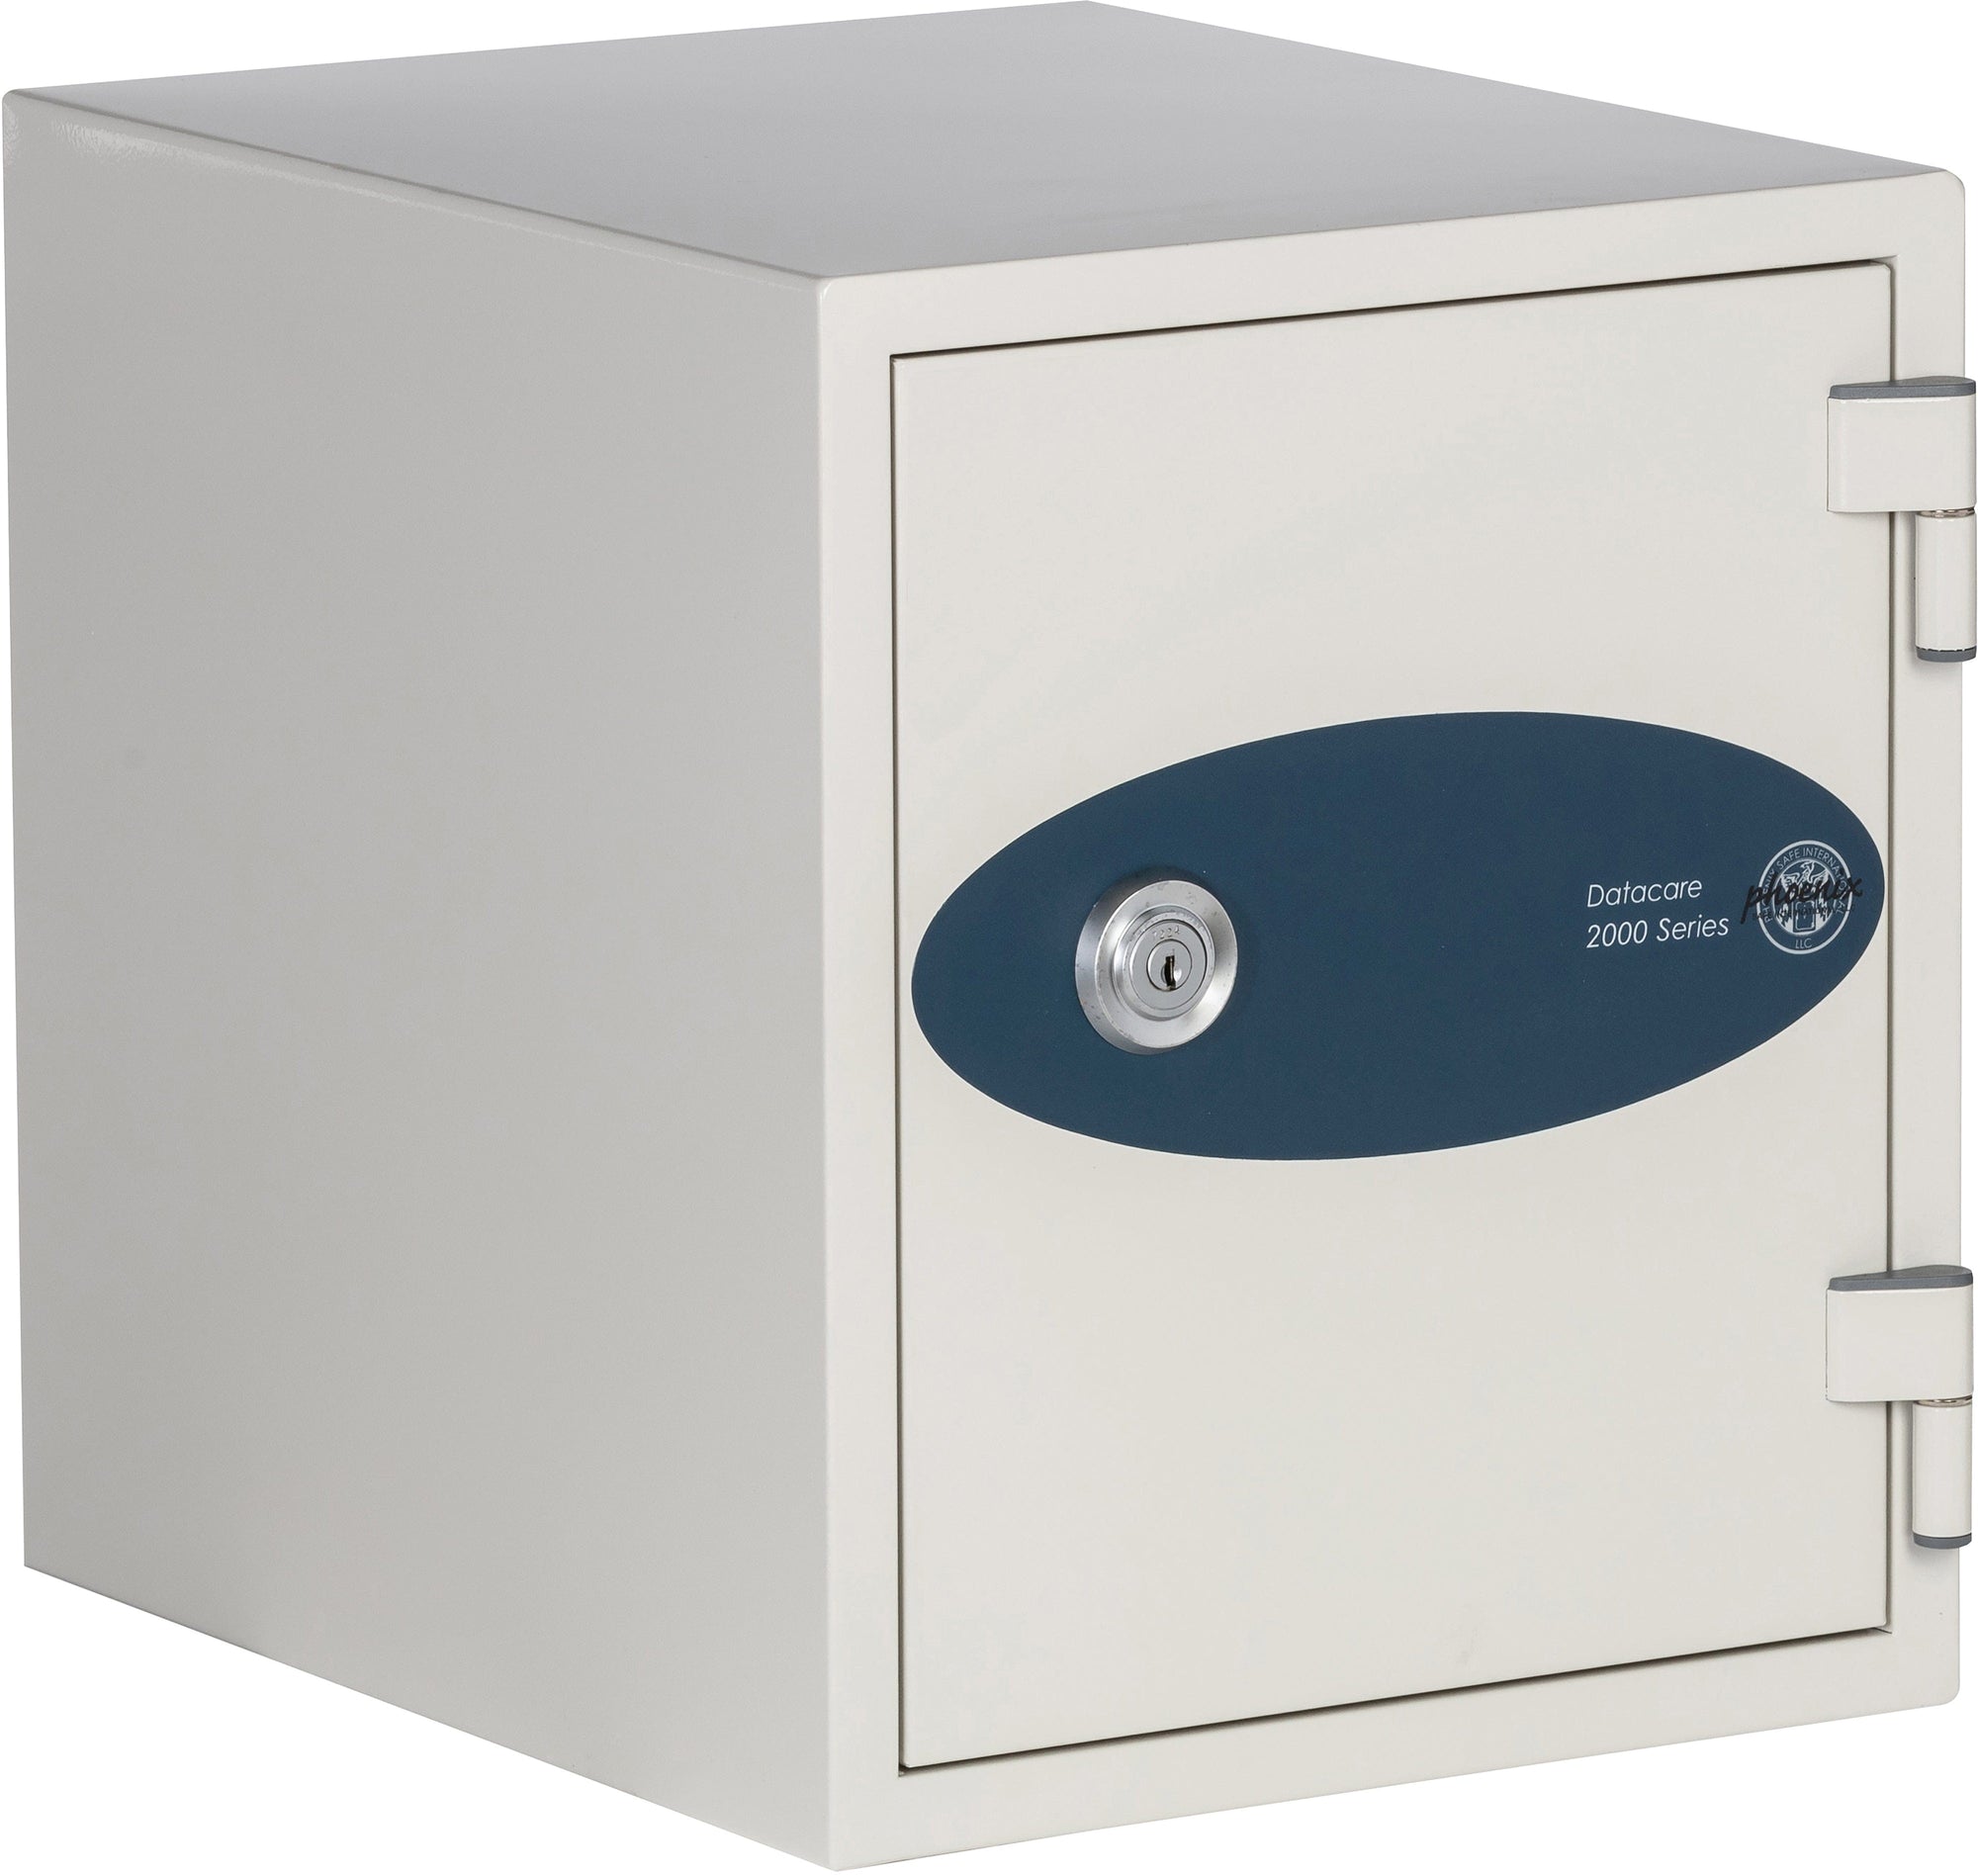 Phoenix 2001 Datacare 1-Hour Key Lock Fireproof Media Safe with Water Seal-Phoenix Safe International-Best Sellers,Business Safes,checklist-Contact Us For Bulk Pricing,checklist-Expert Customer Service,checklist-FREE SHIPPING,checklist-Price Match,checklist-White Glove Or Inside Delivery Available,Home Safes,Sale